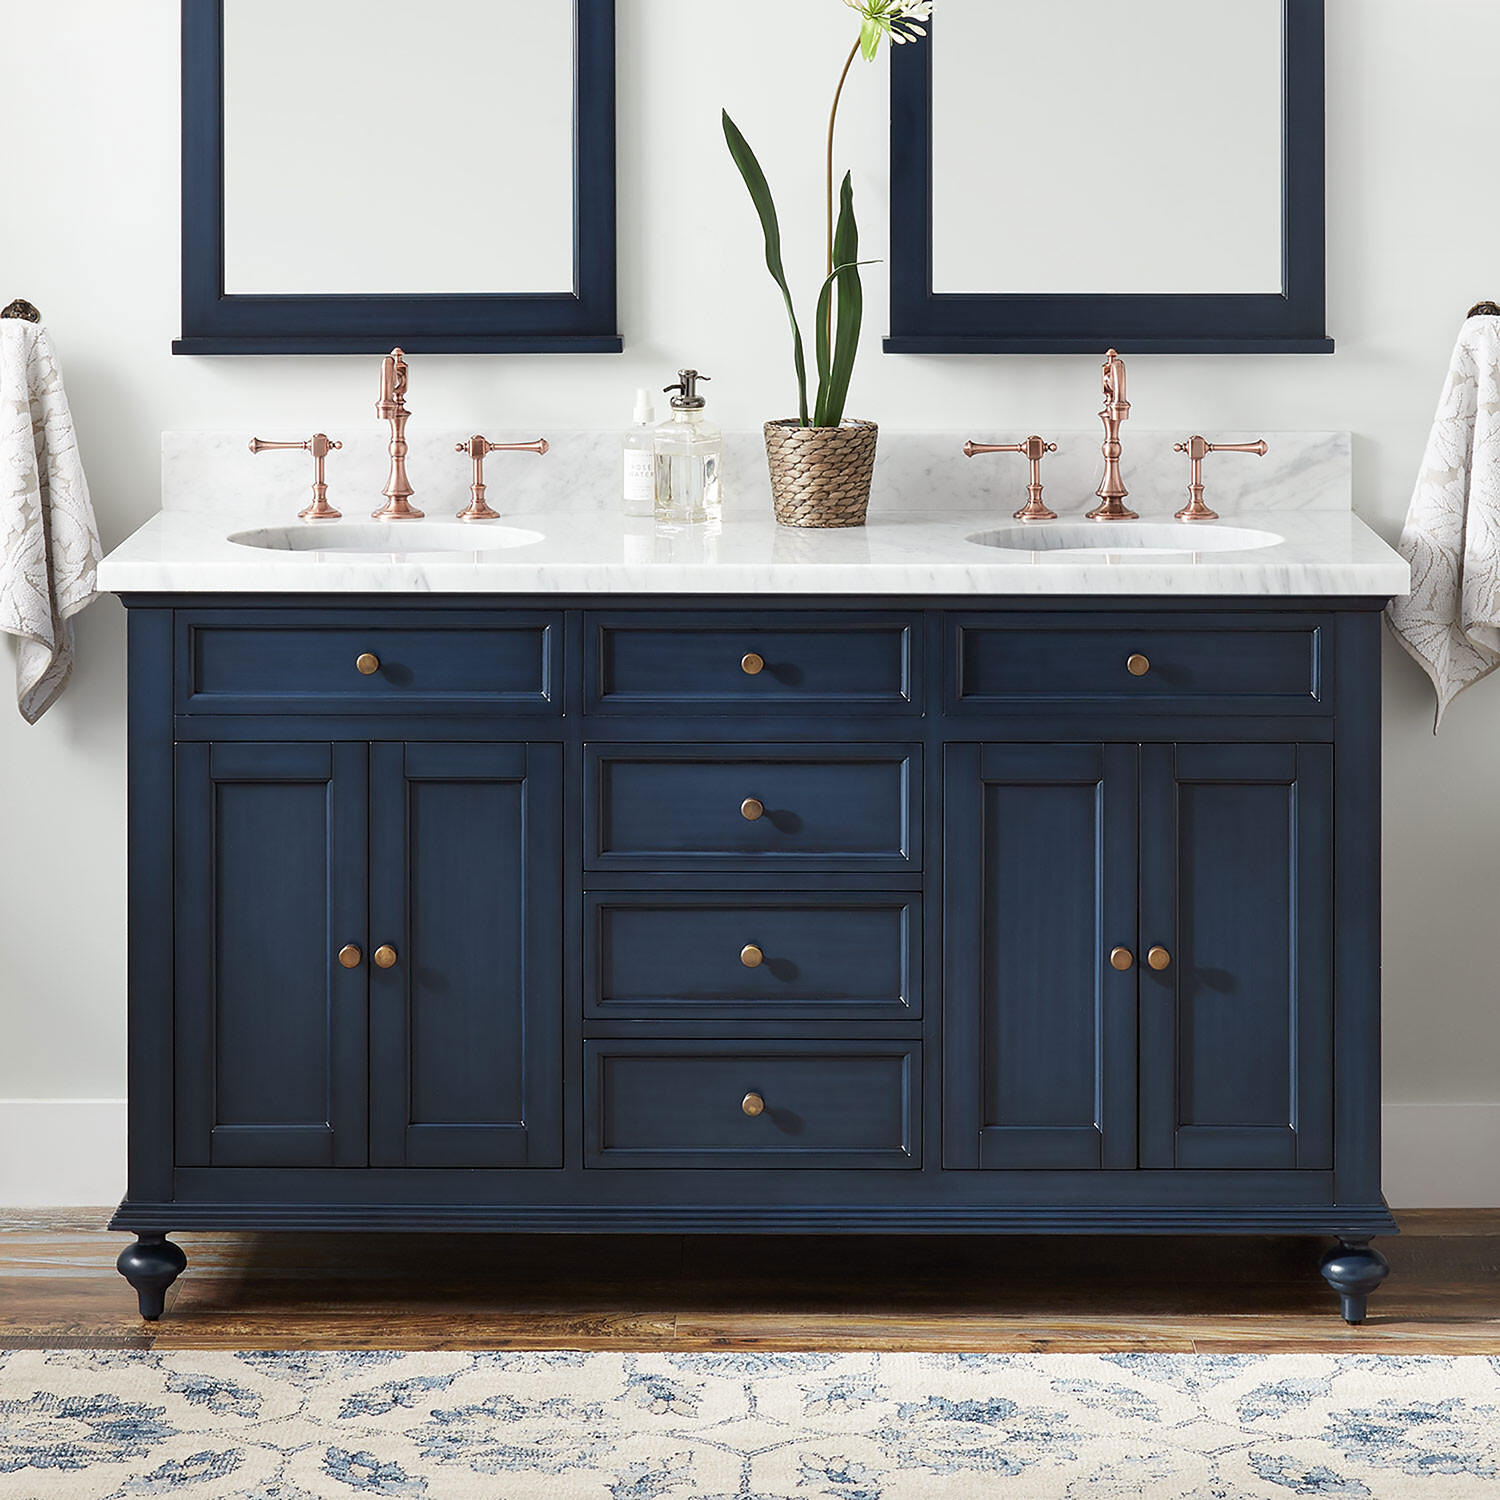 Cabinet knobs and pulls are defining pieces in a bathroom.